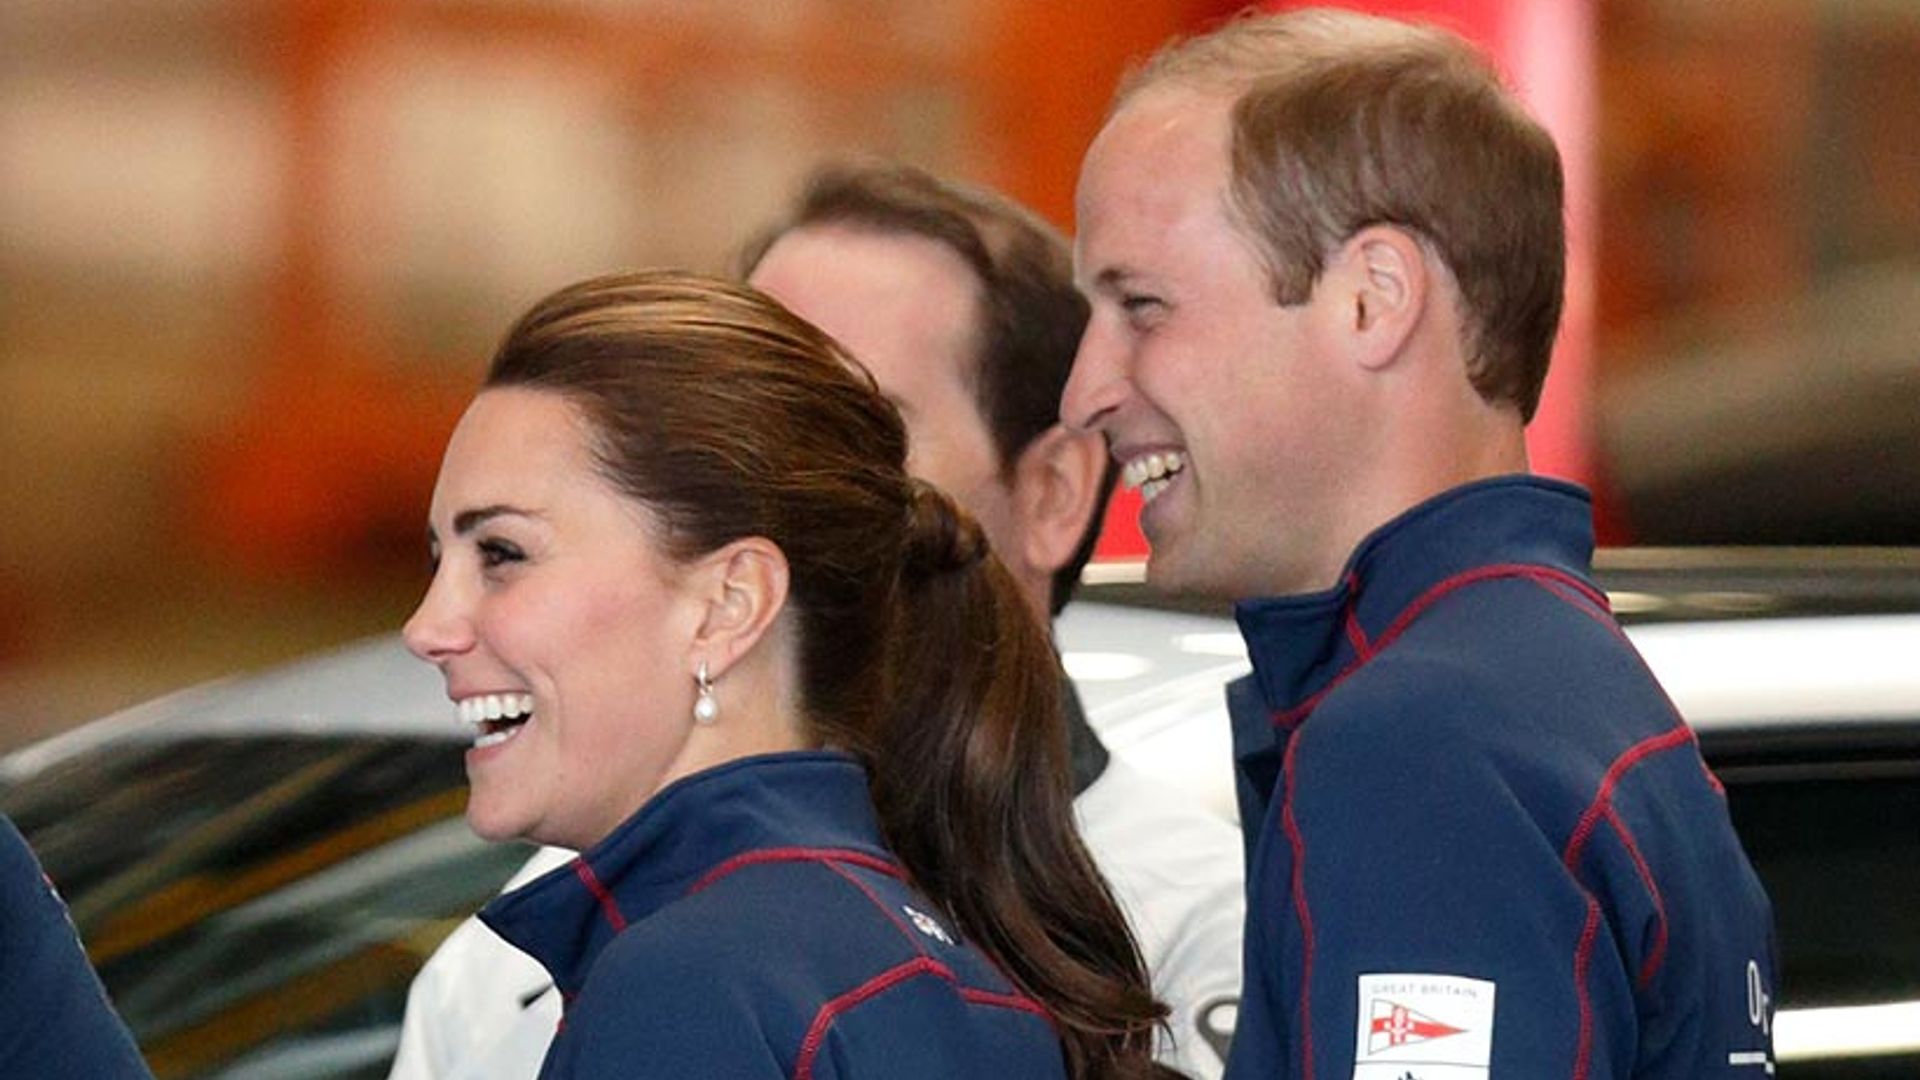 Prince William and Kate's new sailing engagement revealed